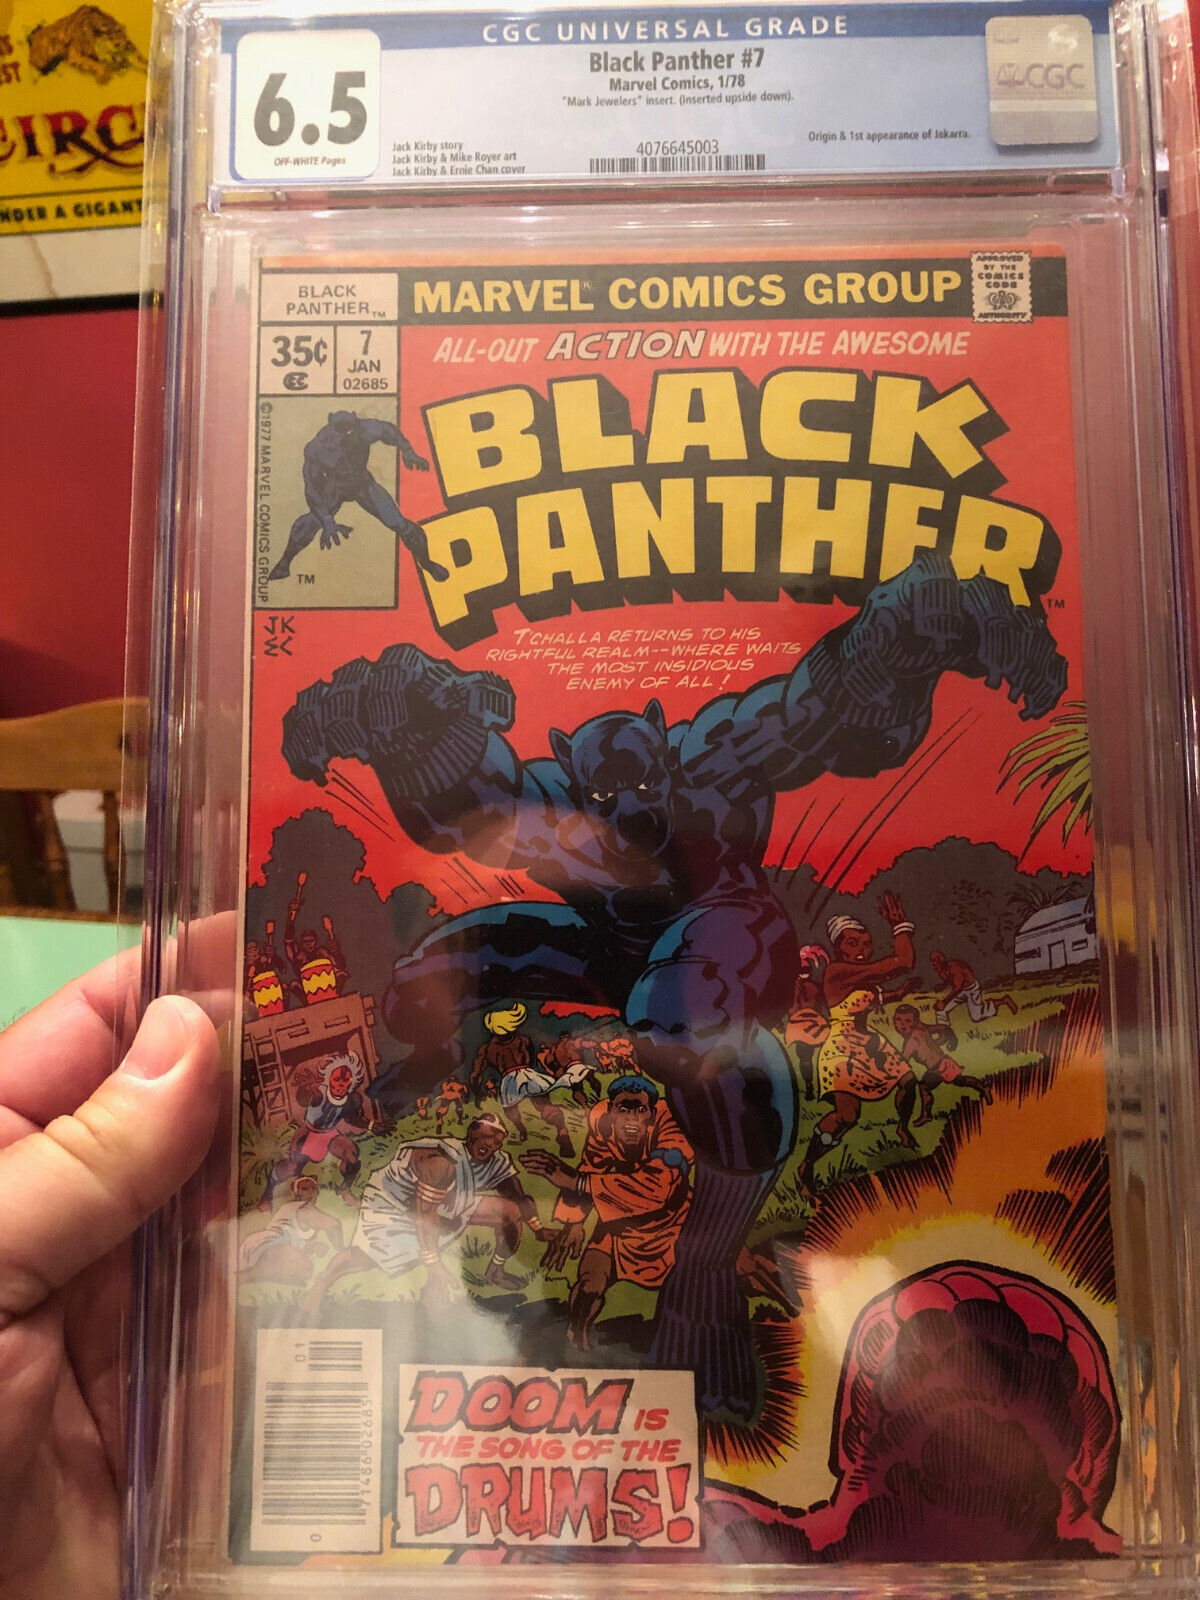 1978 Black Panther 7 CGC 6.5 MARK JEWELERS VARIANT MANUFACTURING ERROR READ